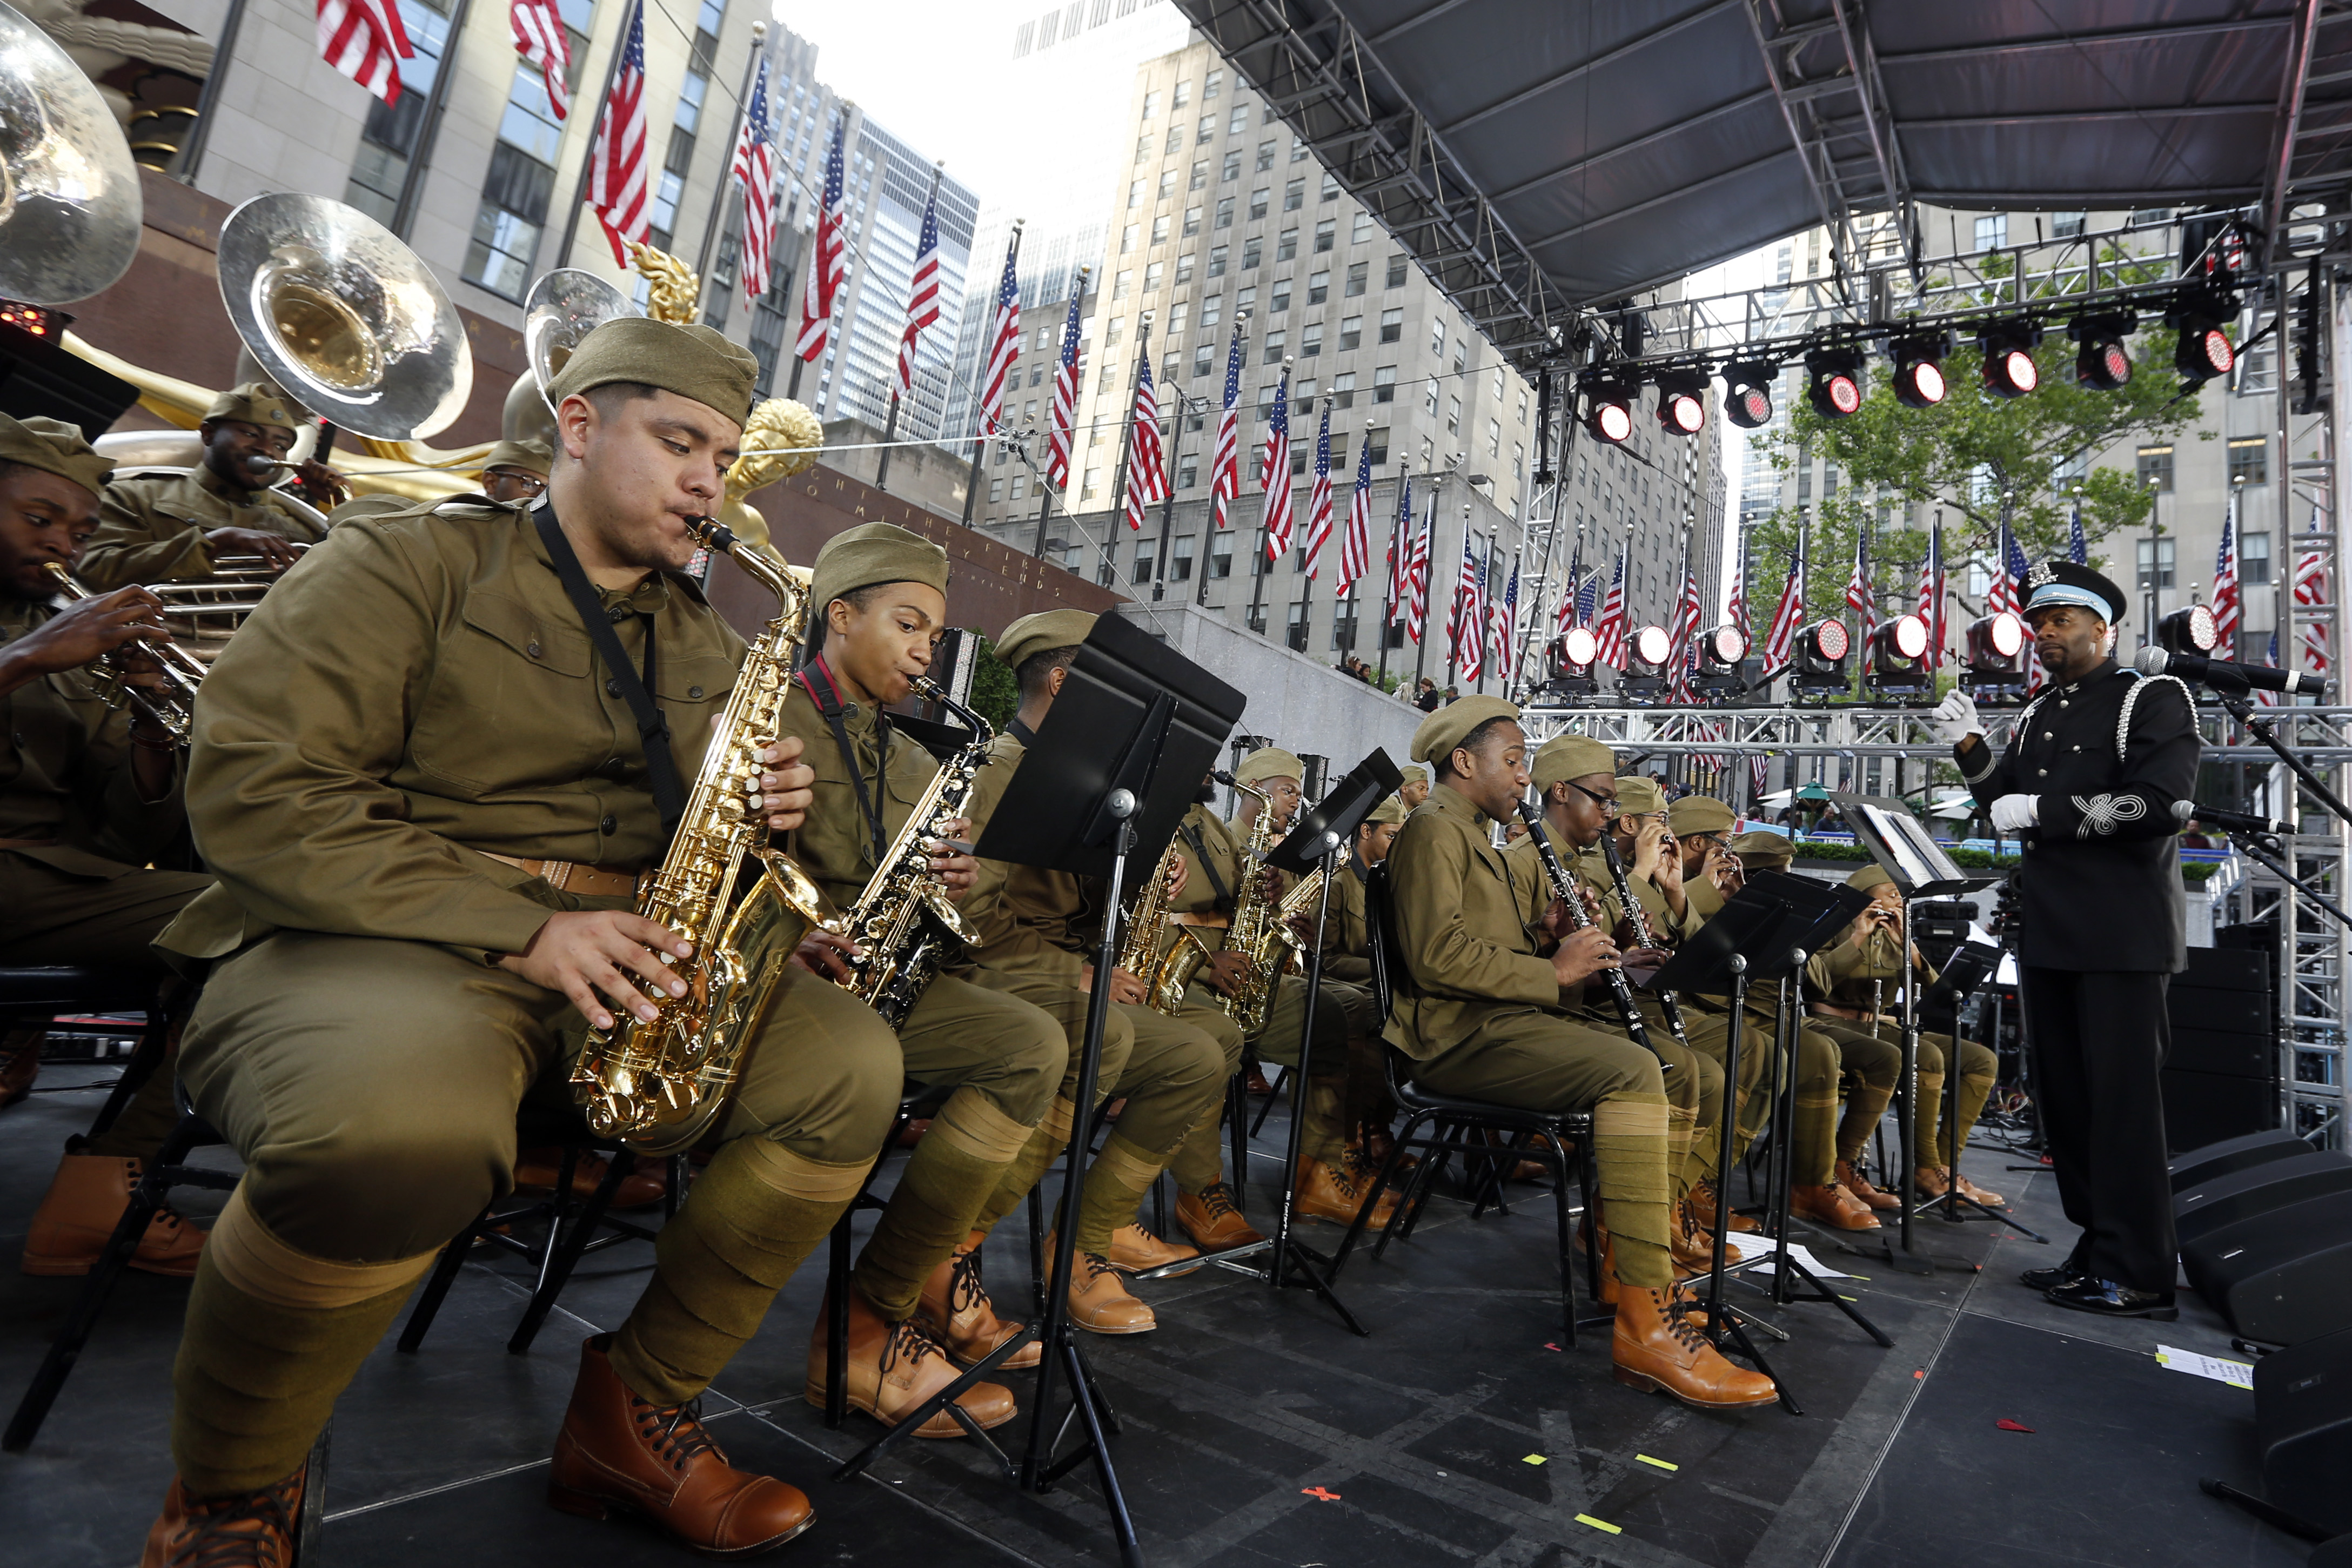 The 369th Experience, a WWI tribute band sponsored by the U.S WWI Centennial Commission, performs in Rockefeller Center during Fleet Week New York, which this year is commemorating WWI, Saturday, May 25, 2019, in New York. The band, which is made up of music students from Historically Black Colleges and Universities across the U.S., play the musical repertoire of New York's legendary 369th Regiment "Harlem Hellfighters" Regimental Jazz Band. (Jason DeCrow/AP Images for U.S. WWI Centennial Commission)